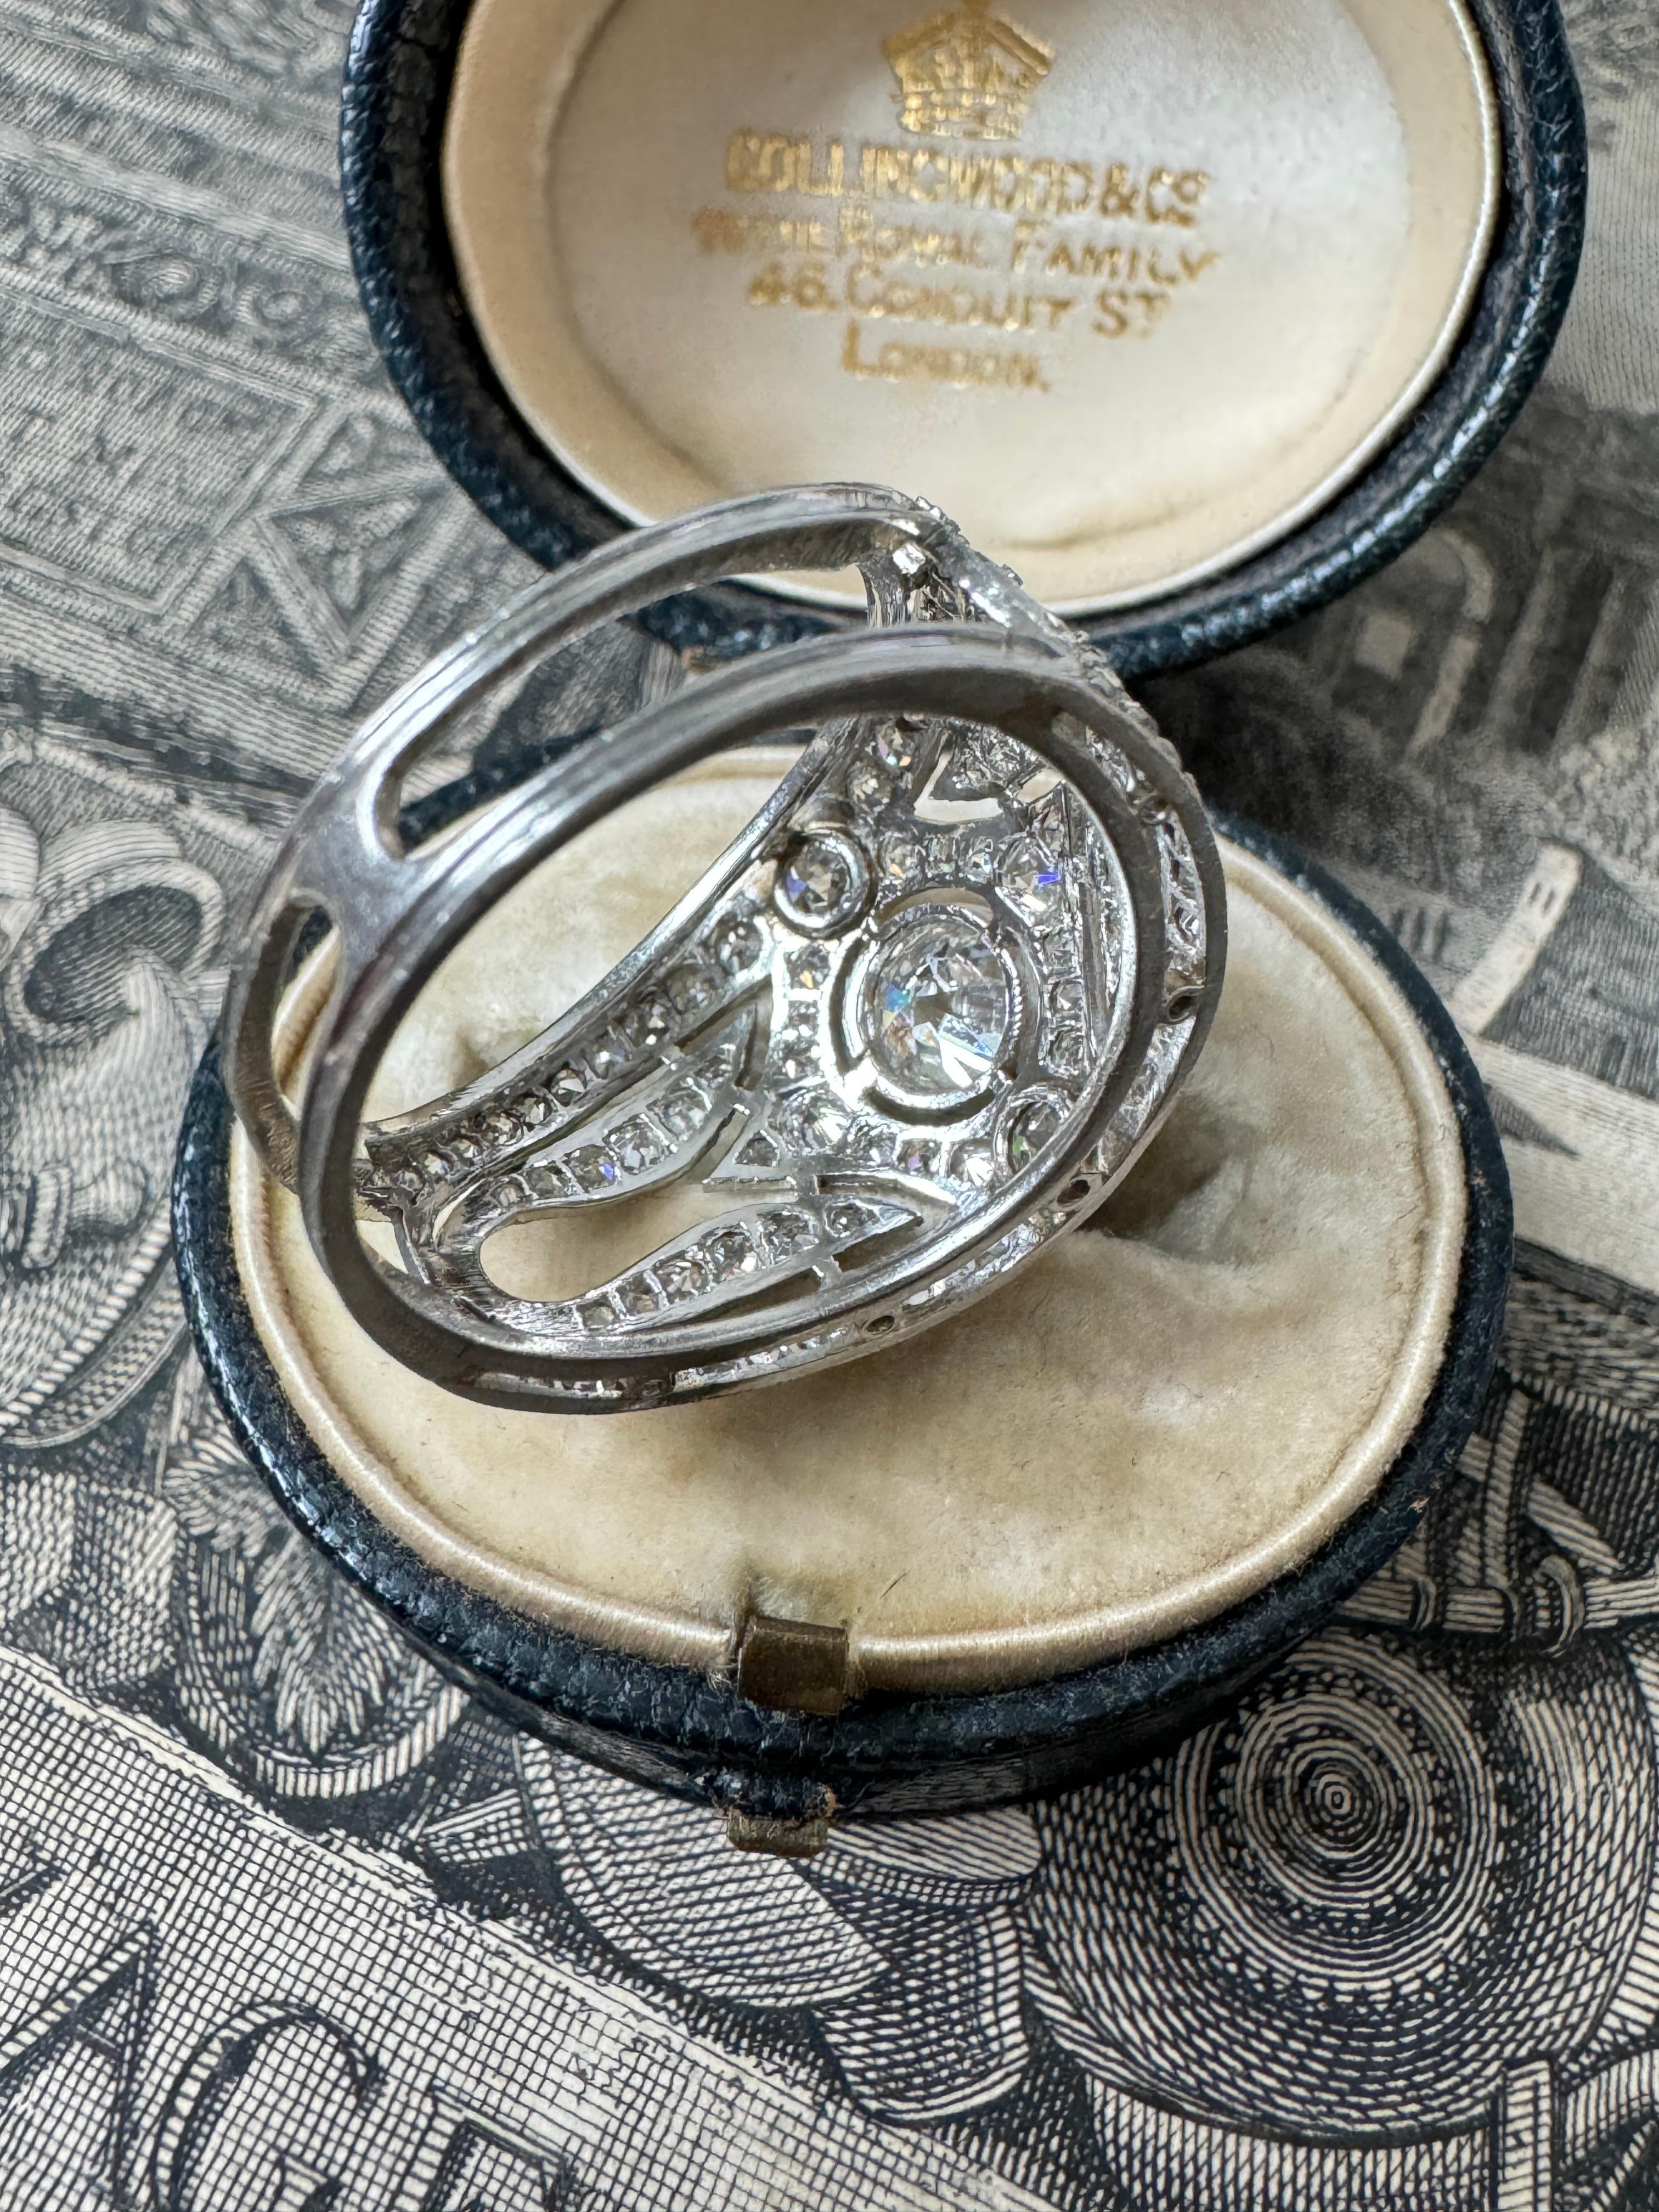 Late Edwardian Platinum and Diamond Cigar Band Ring In Excellent Condition For Sale In Hummelstown, PA